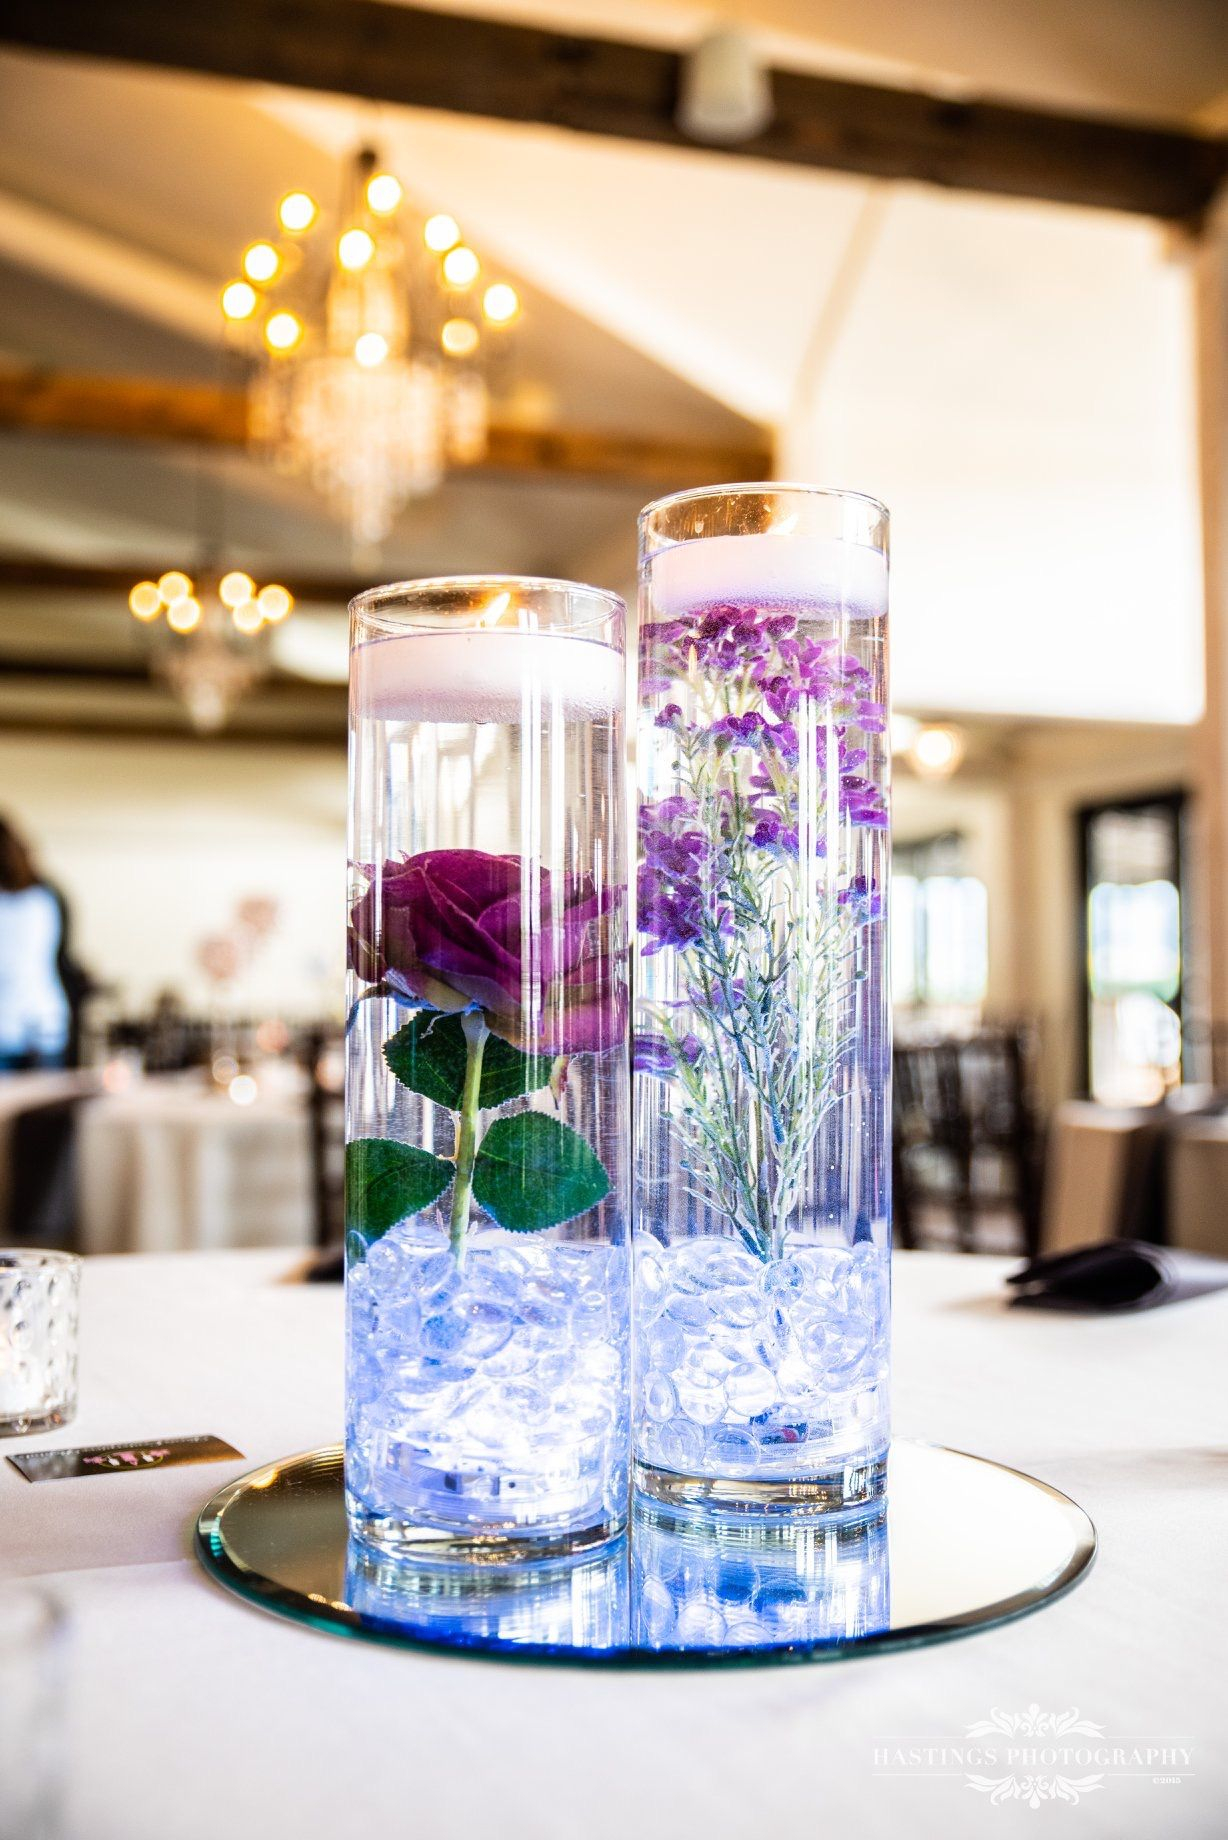 Glass Vase Filled With Water Lights Up Flower regarding size 1228 X 1840